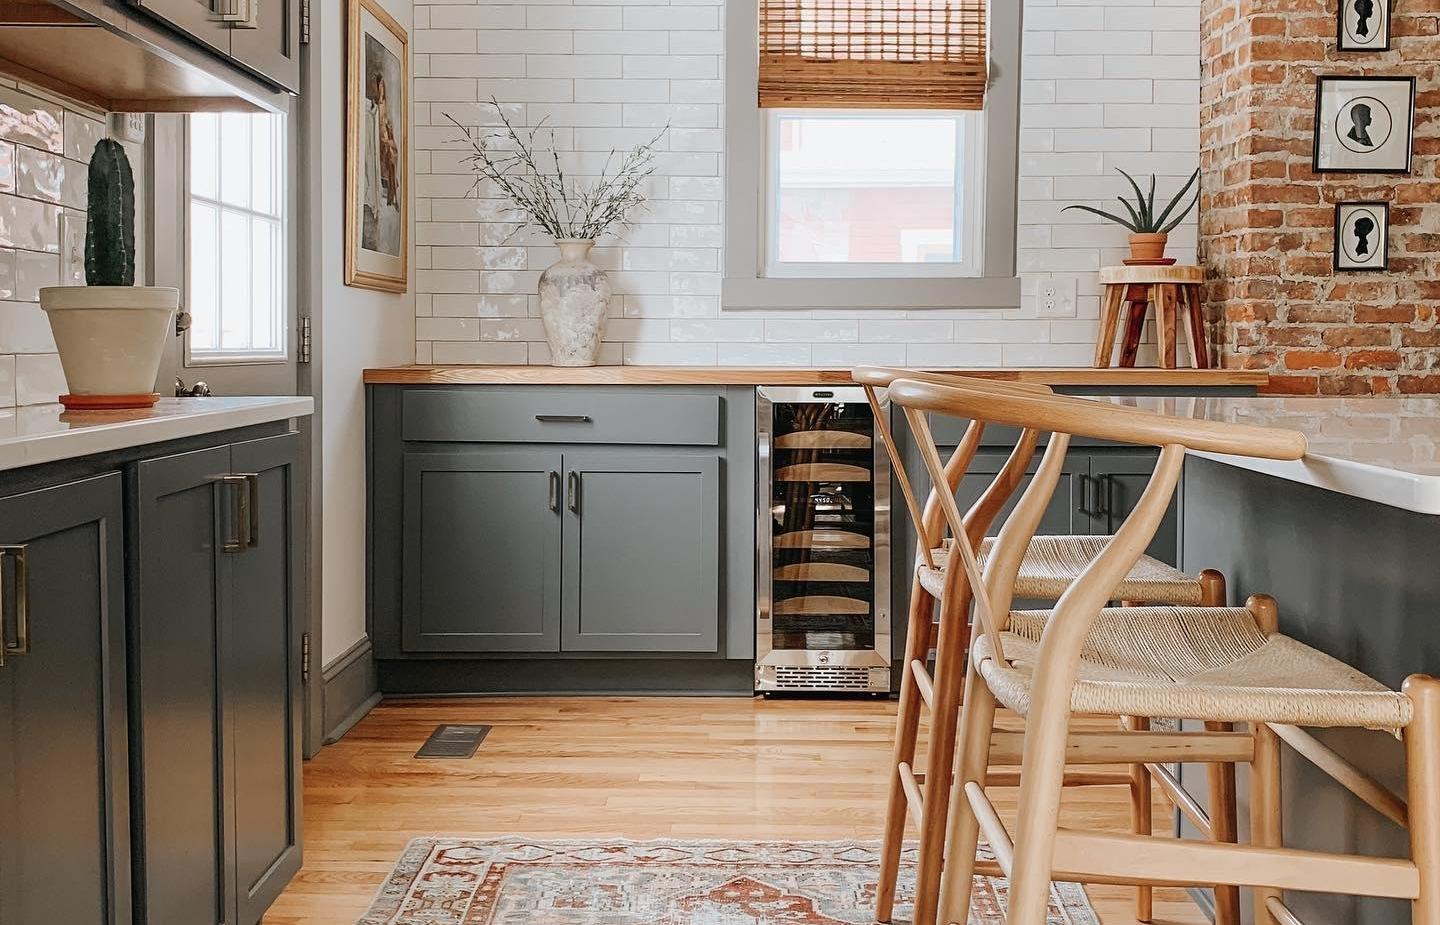 A kitchen with white brick walls, grey cabinets, and hardwood flooring.